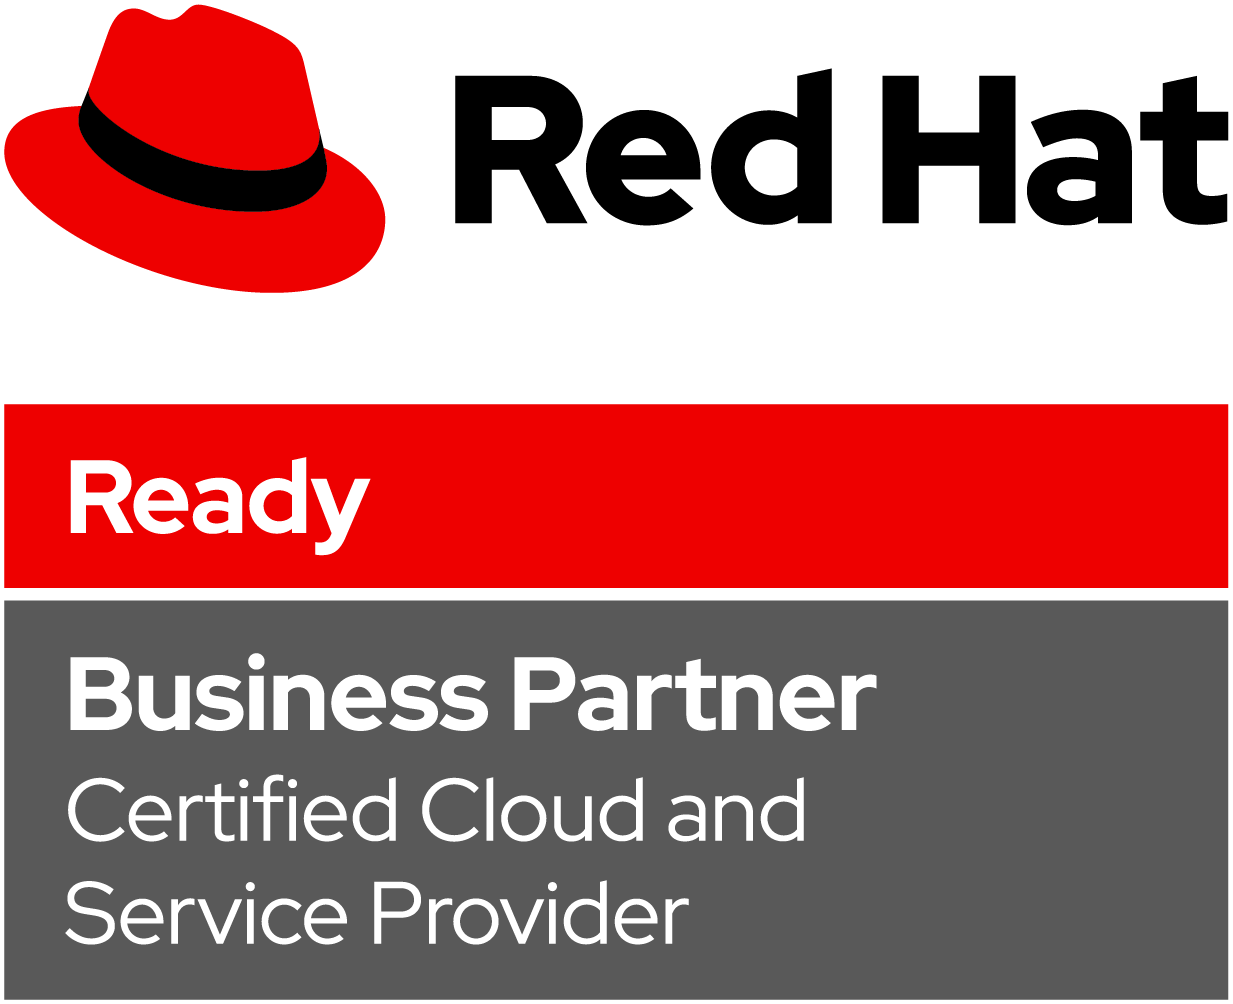 logo-redhat-ready-businesspartner-certifiedcloudserviceprovider-a-standard-rgb.png